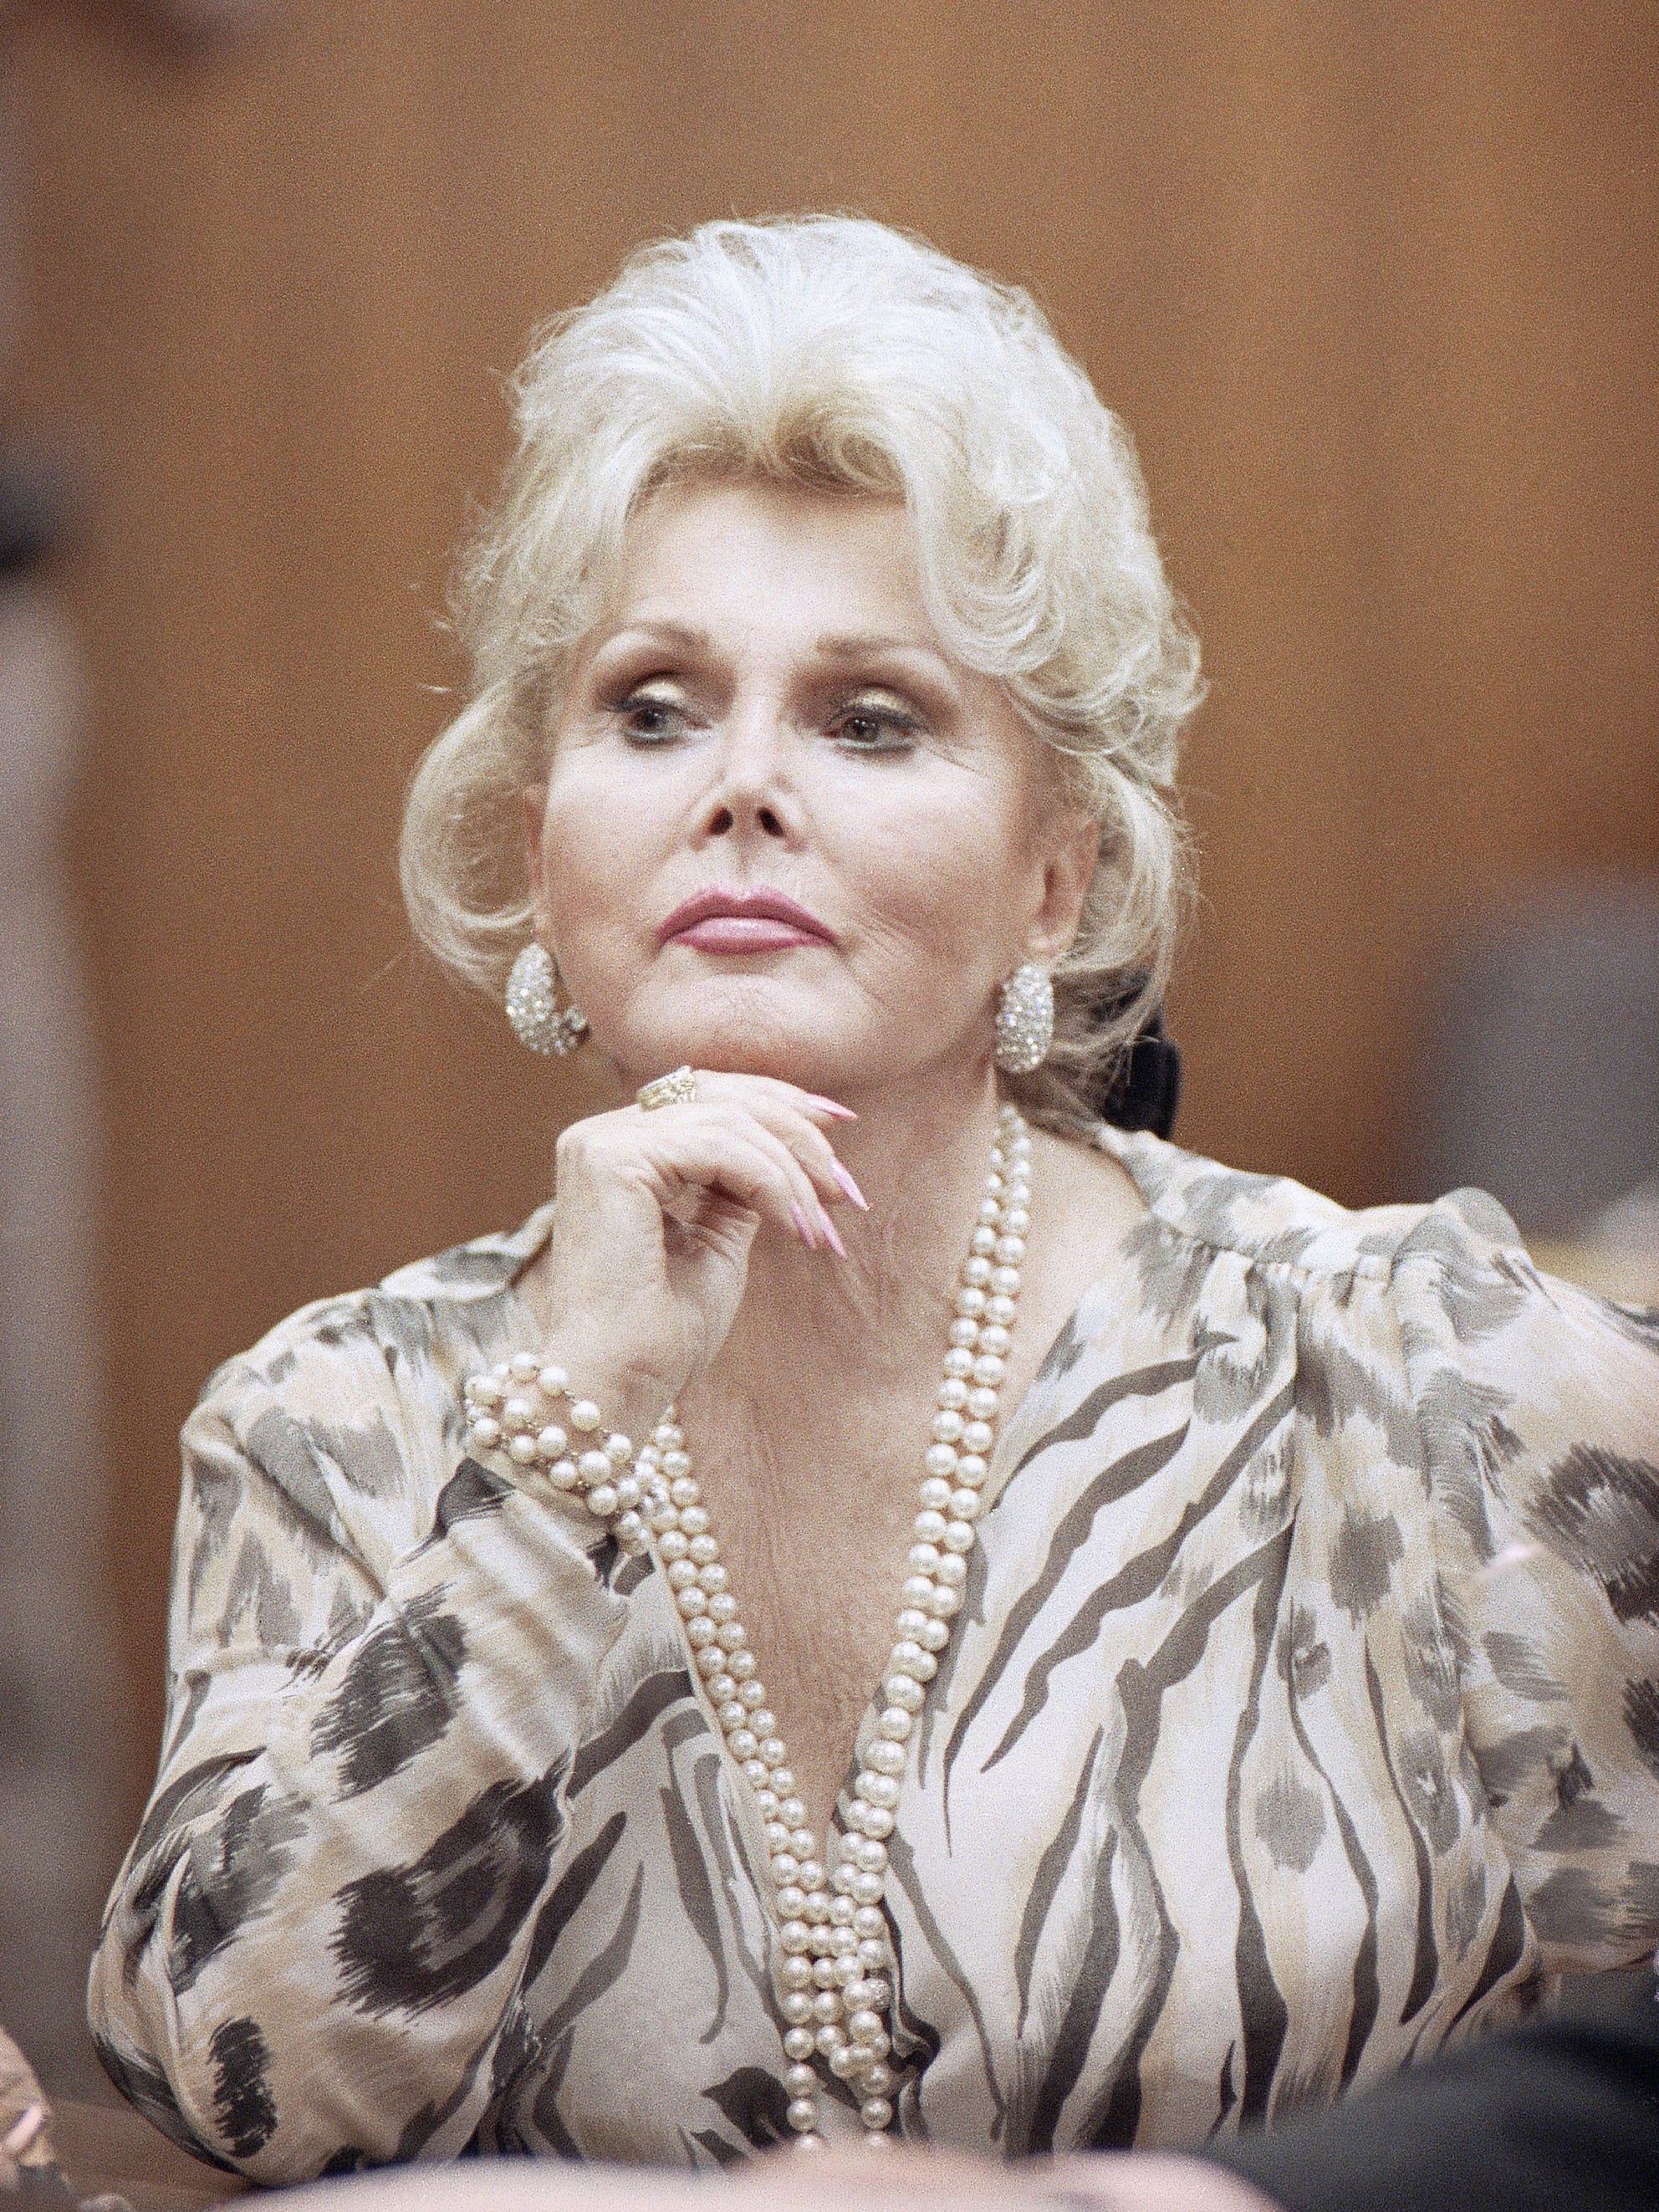 Zsa Zsa one of the first celebutantes, is dead at 99